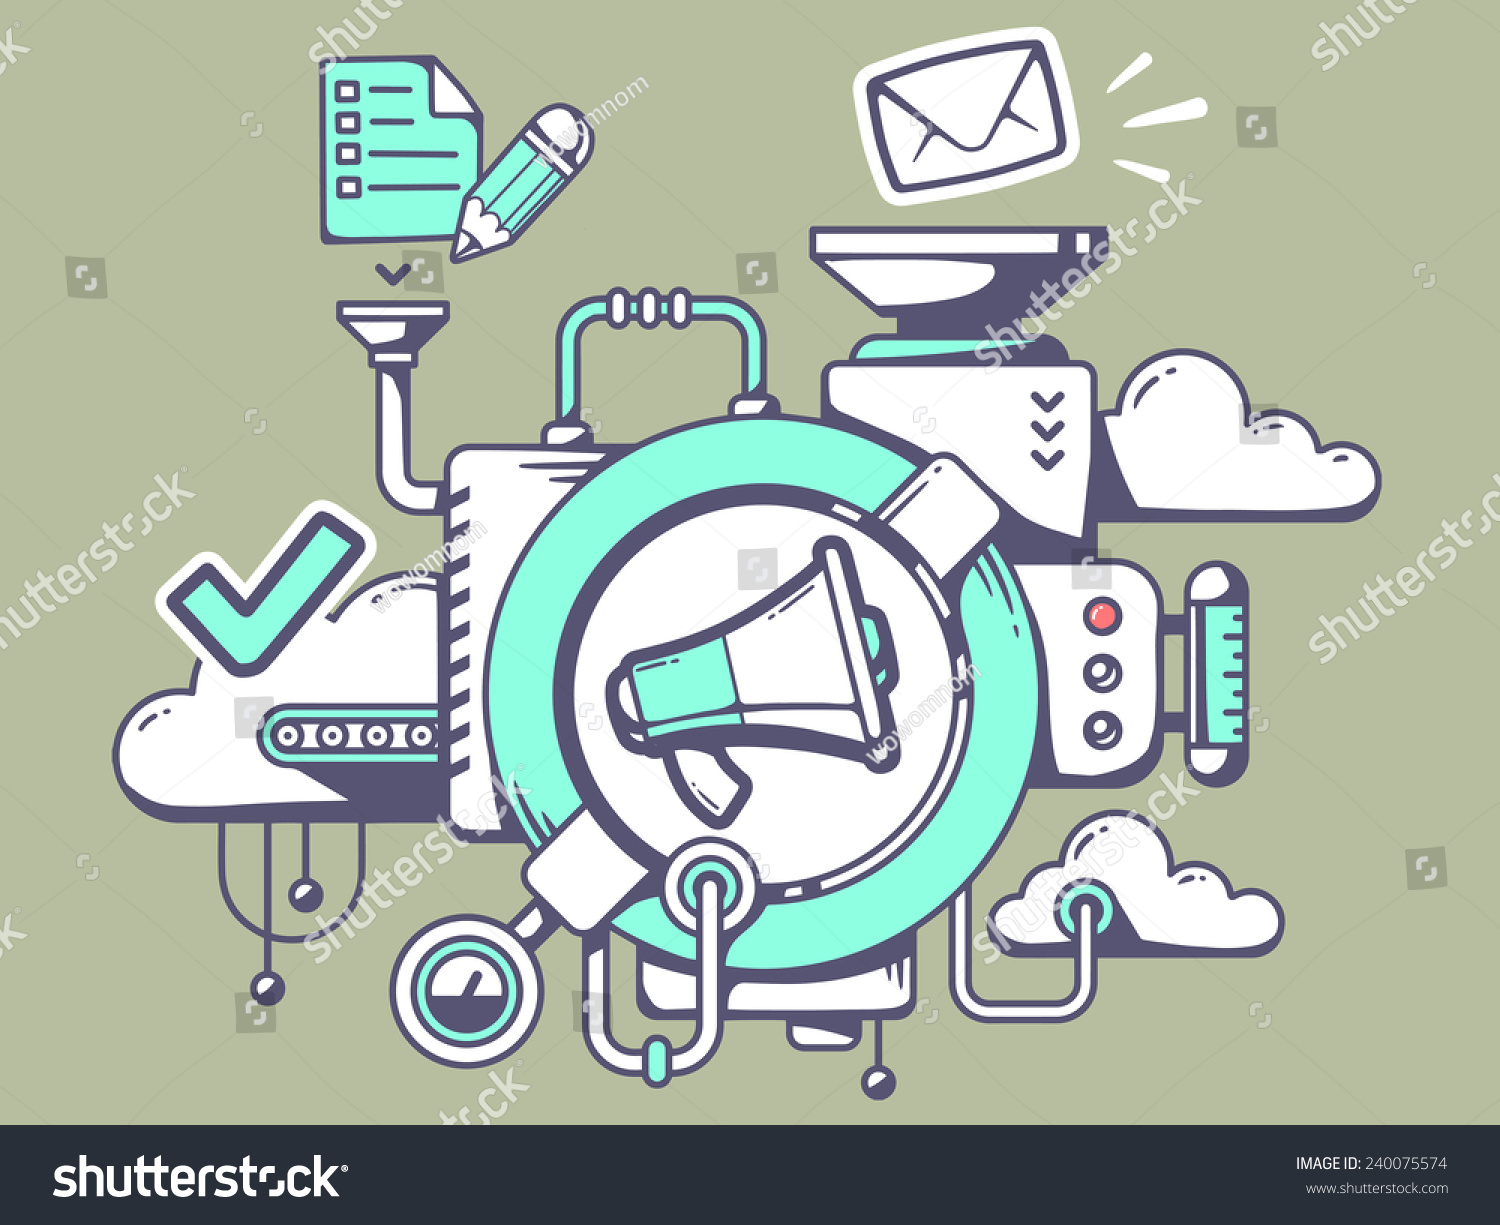 Vector illustration of mechanism with megaphone and office icons on green background. Line art design for web, site, advertising, banner, poster, board and print. #240075574